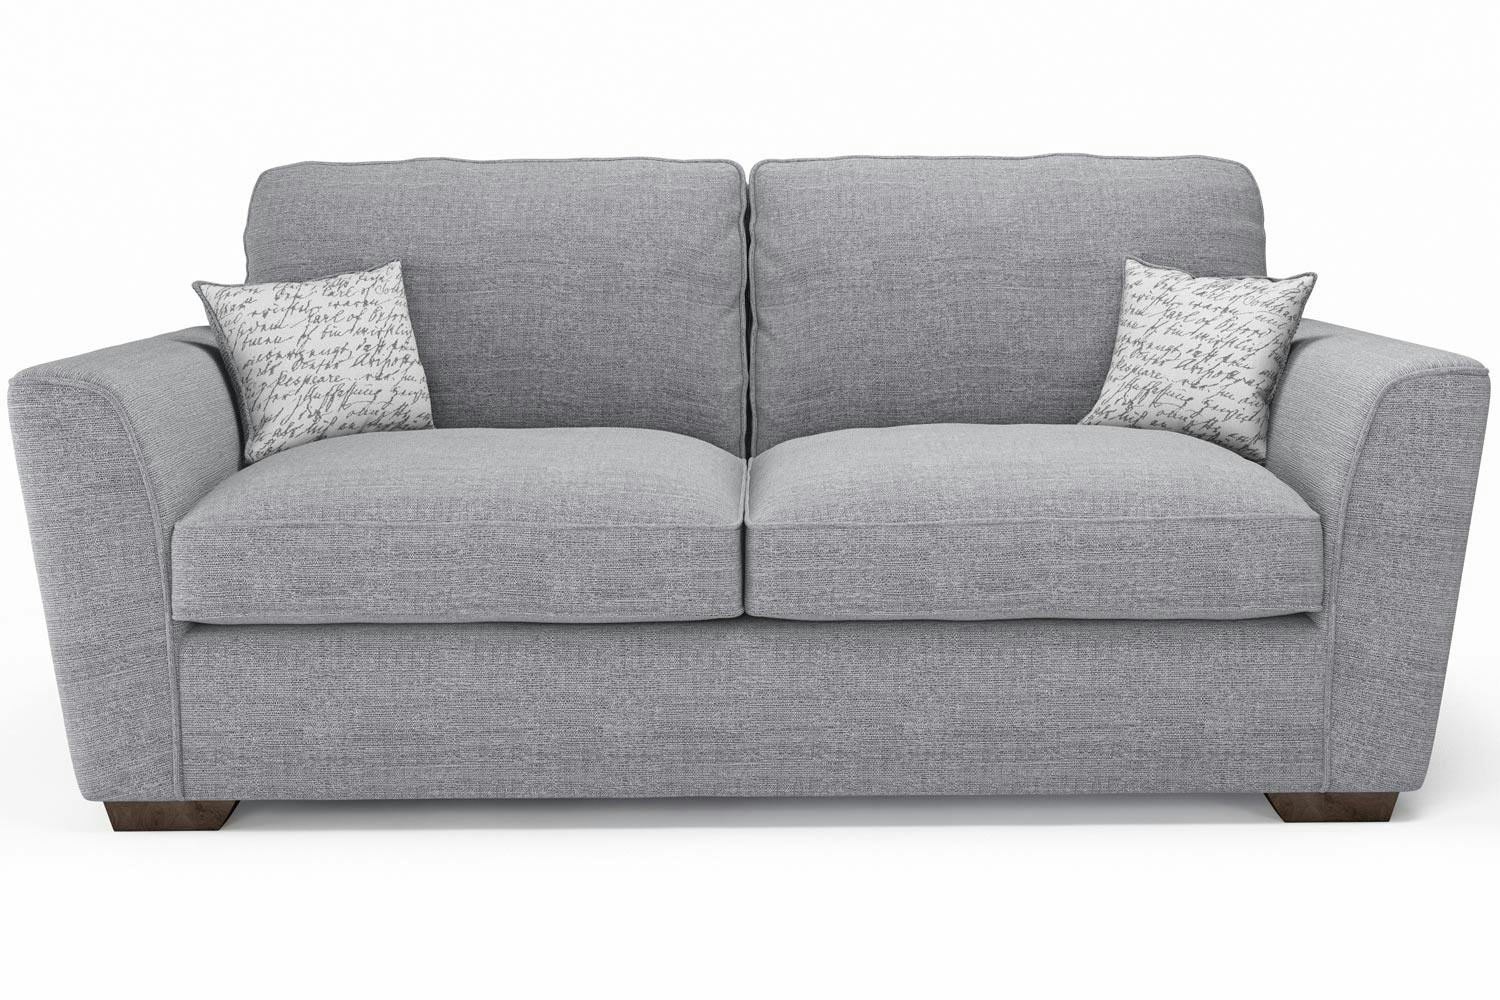 White Couch 3 Seater On Living Room Ideas